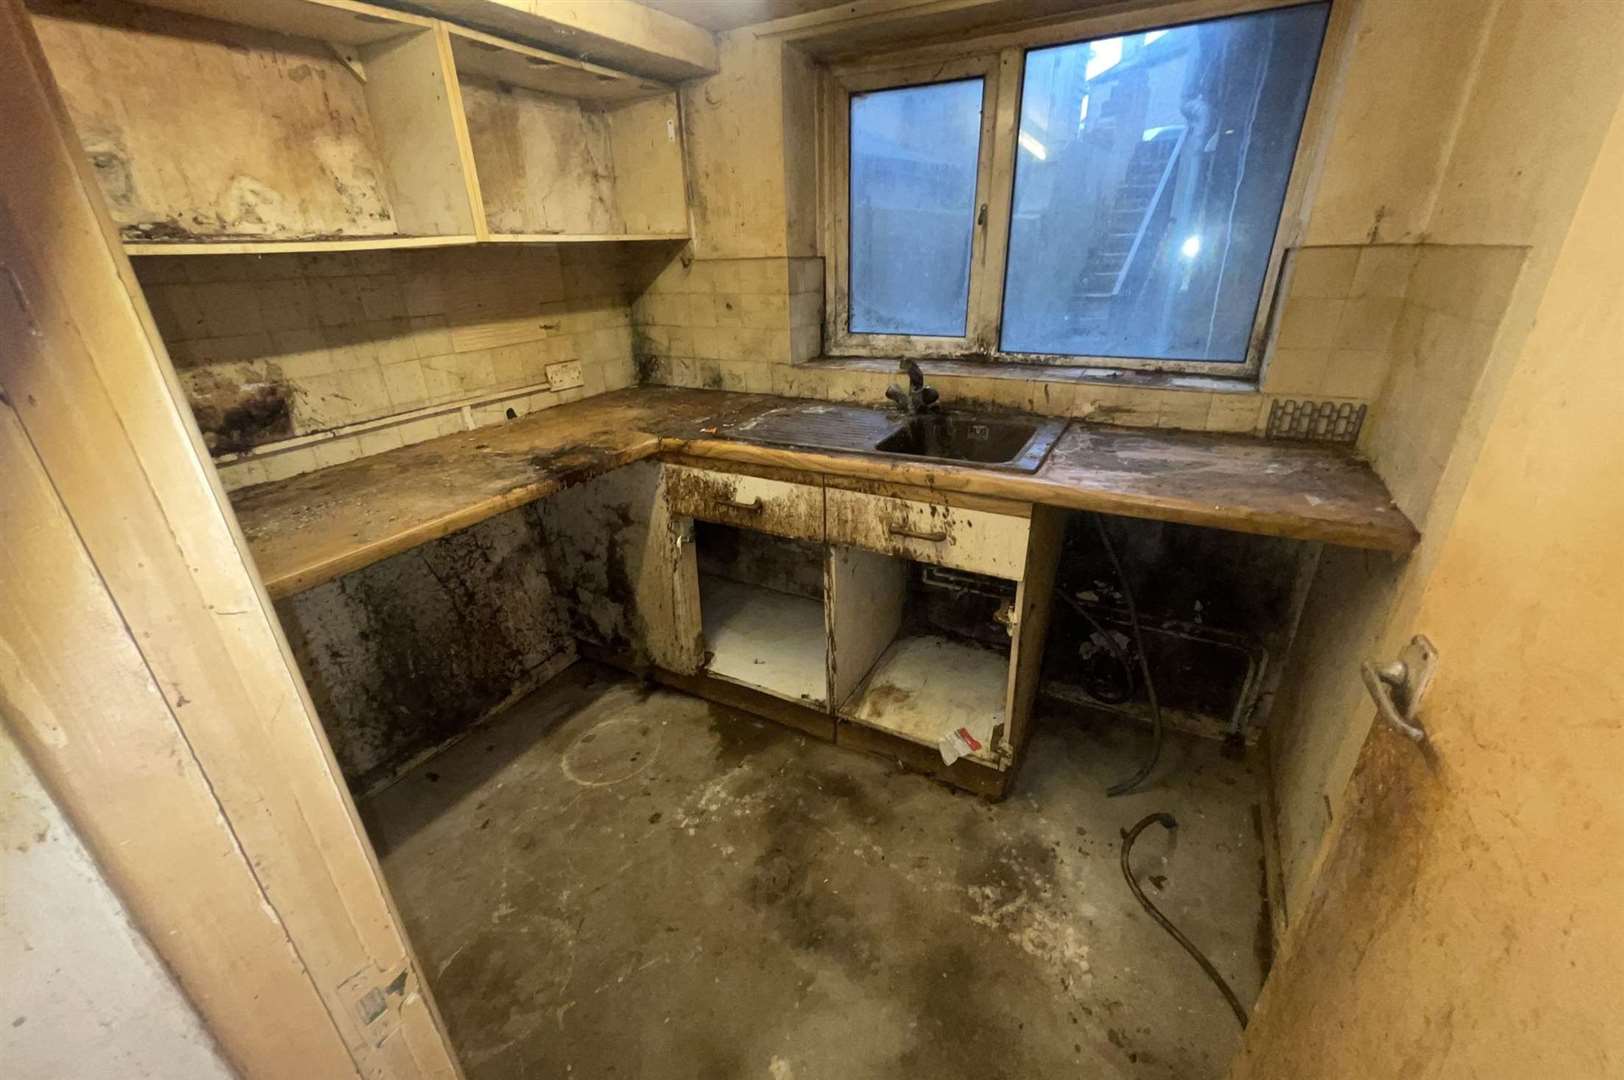 The kitchen floors, surfaces and sink were caked in grime and dirt. Photo: SWNS